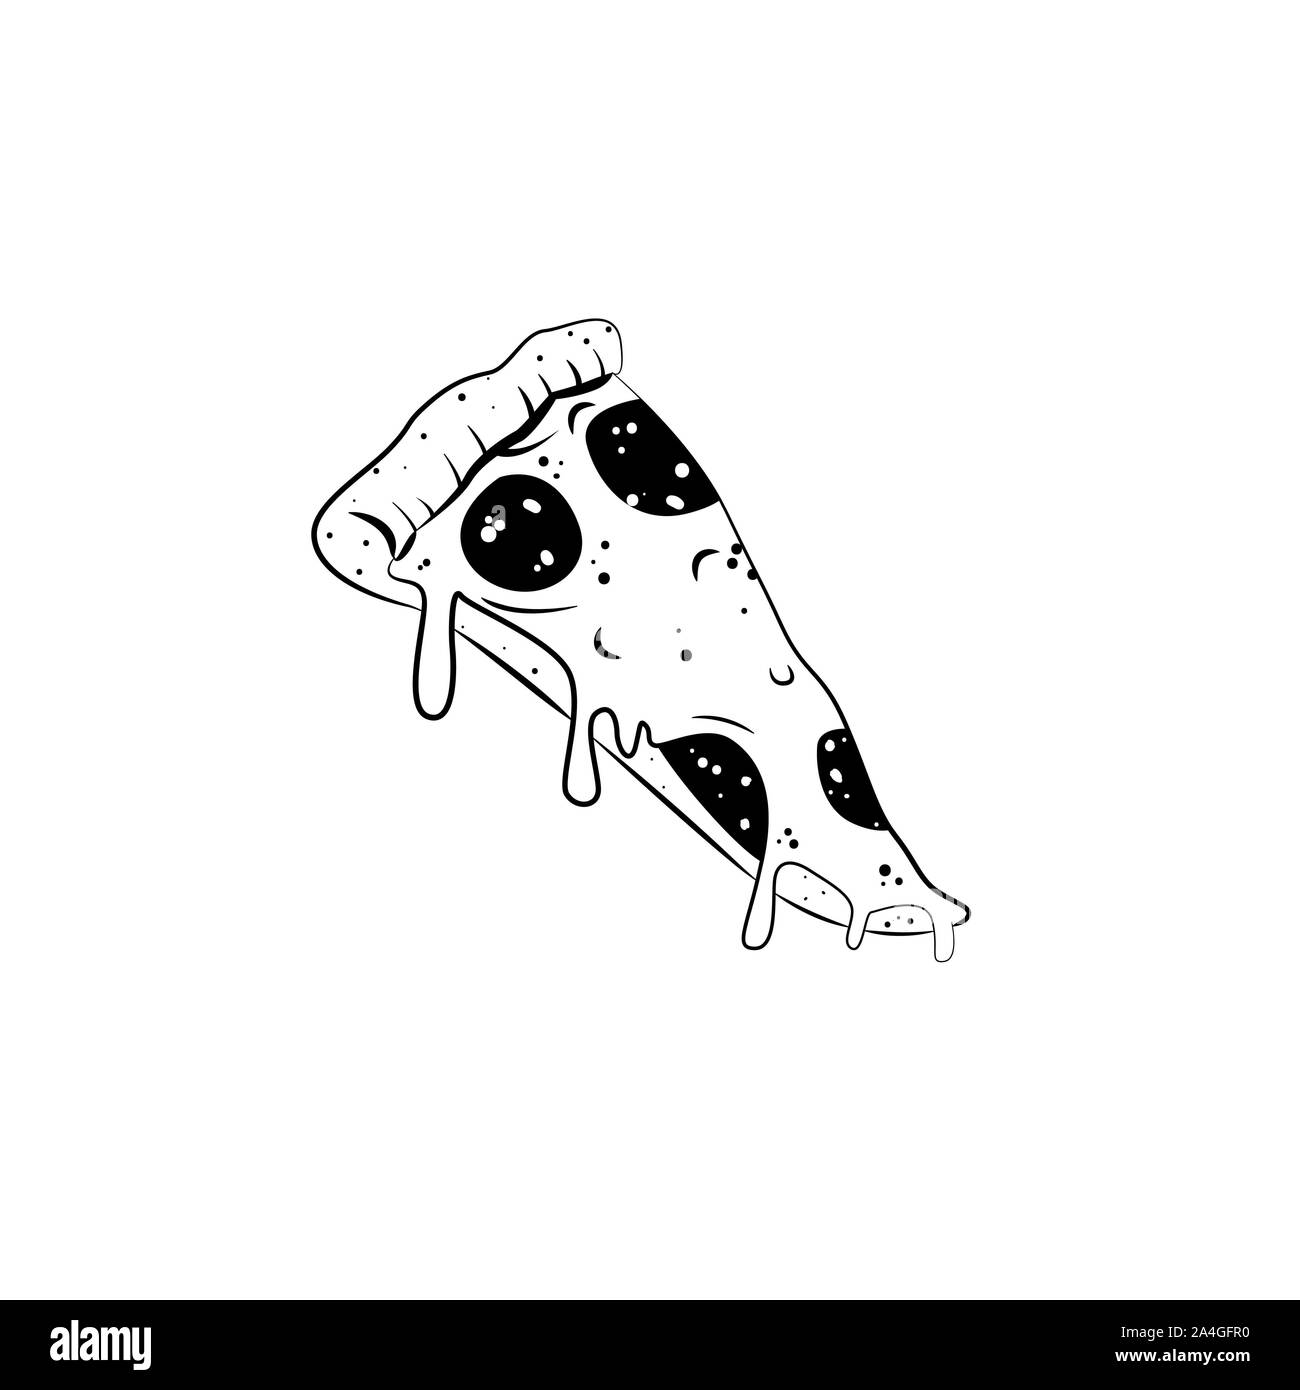 Vector illustration. Pizza slice with melted cheese and pepperoni. Hand drawn doodle. Cartoon sketch. Decoration for greeting cards, posters, emblems Stock Photo